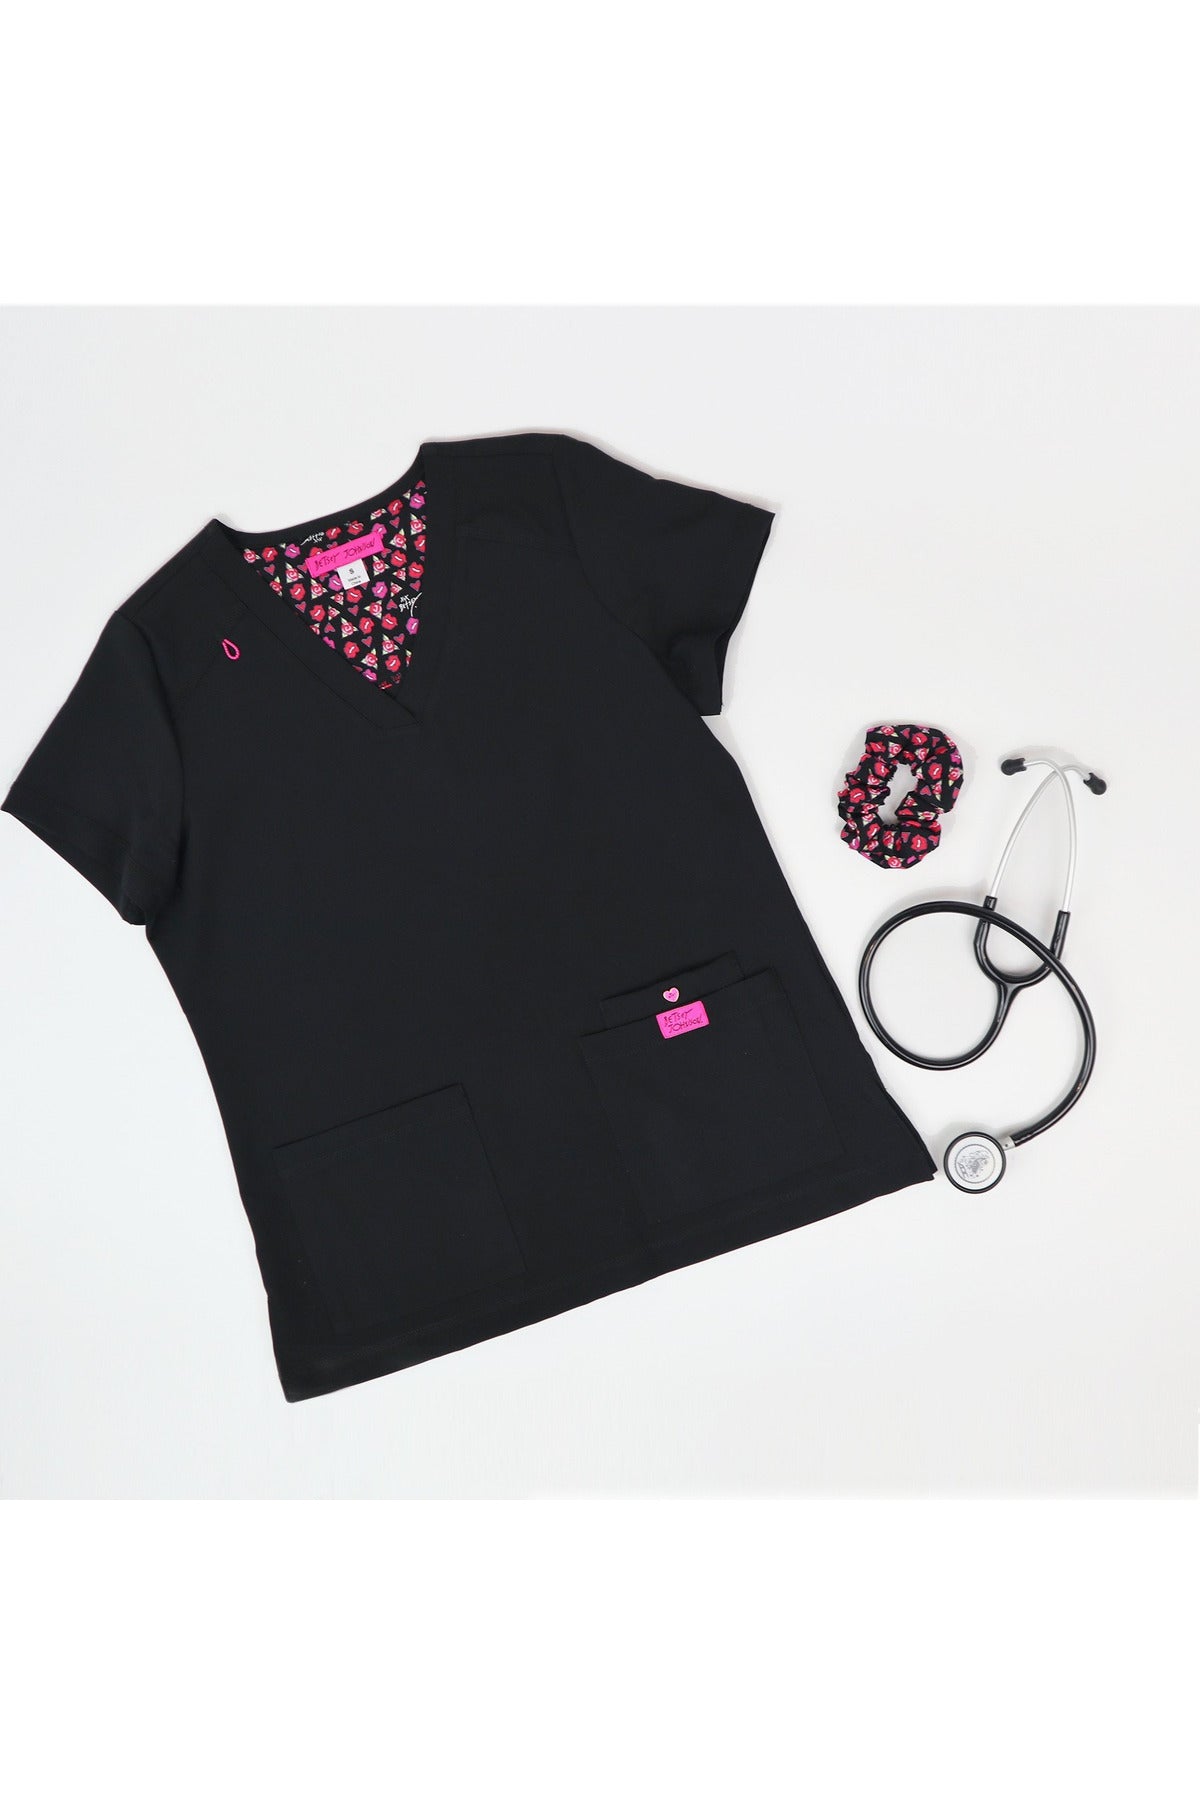 Freesia Top by Betsey Johnson – RC Uniforms